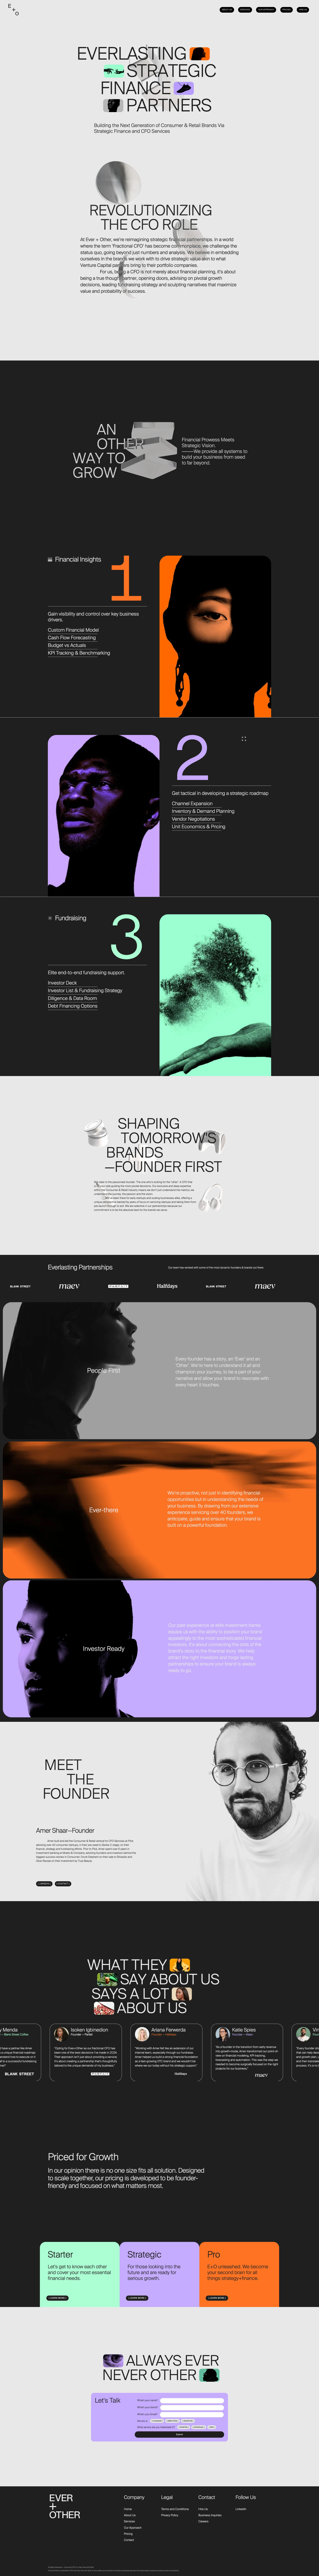 Ever+Other Landing Page Example: Ever+Other is a finance strategy and CFO service firm that specialises in consulting consumer product focused brands.